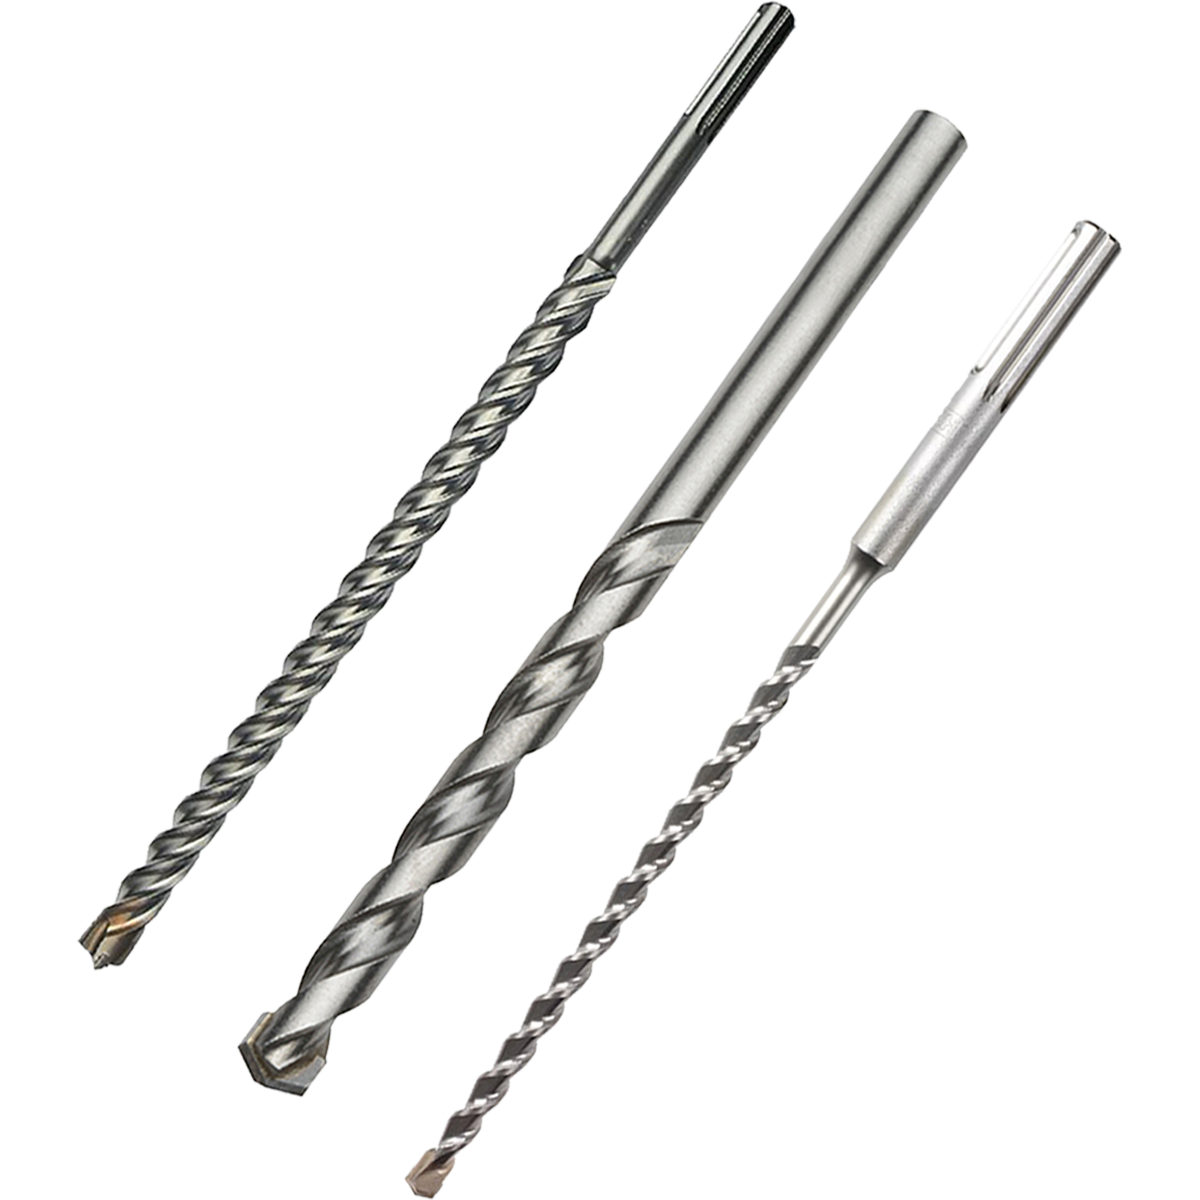 A comprehensive range of masonry and SDS drill bits at competitive prices